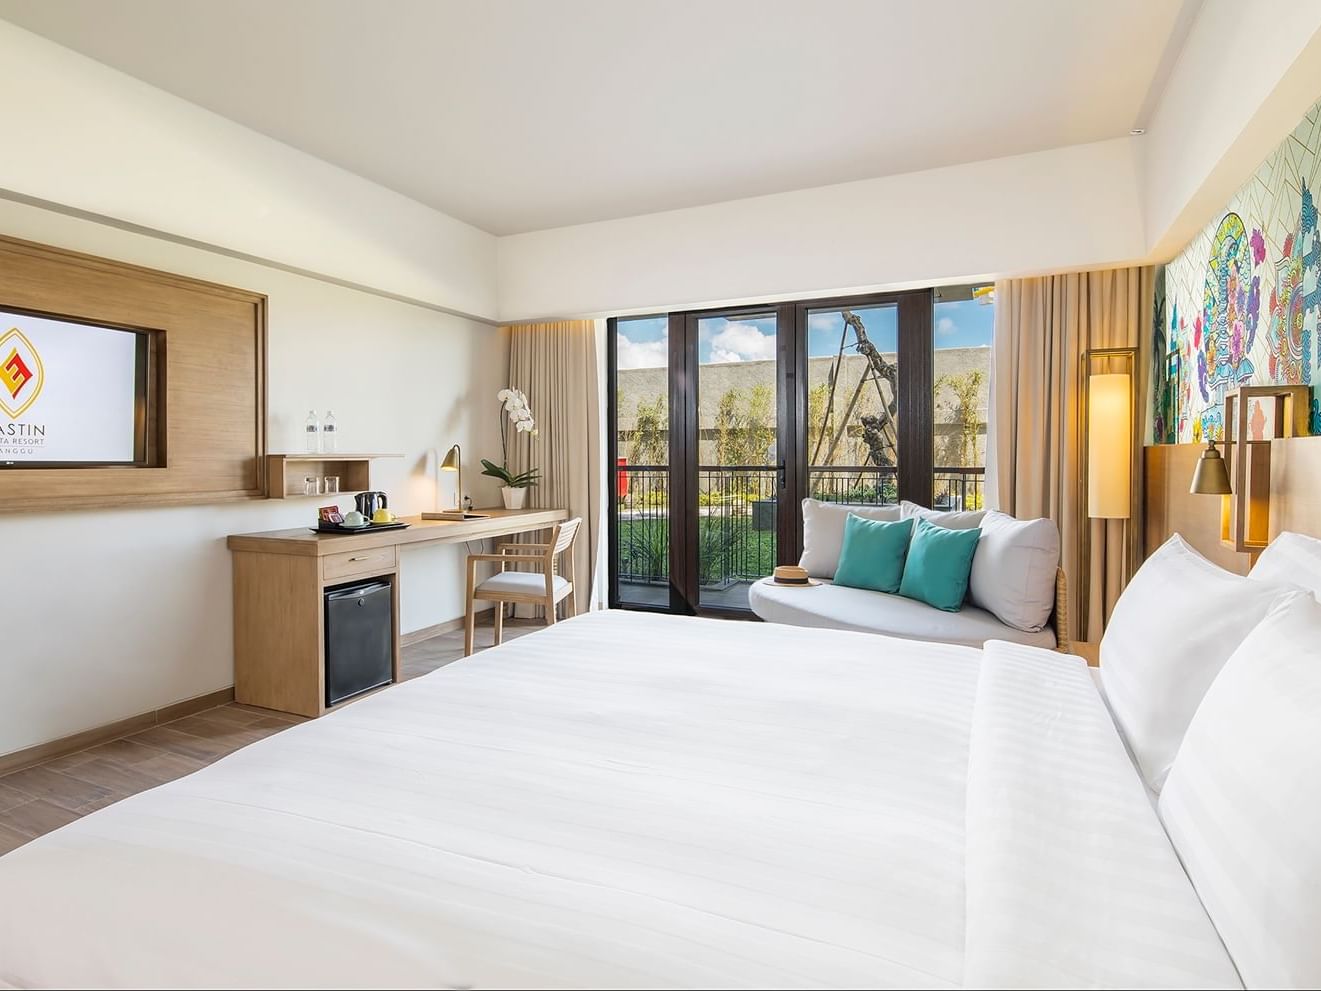 Deluxe Room with comfy bed at Eastin Ashta Resort Canggu